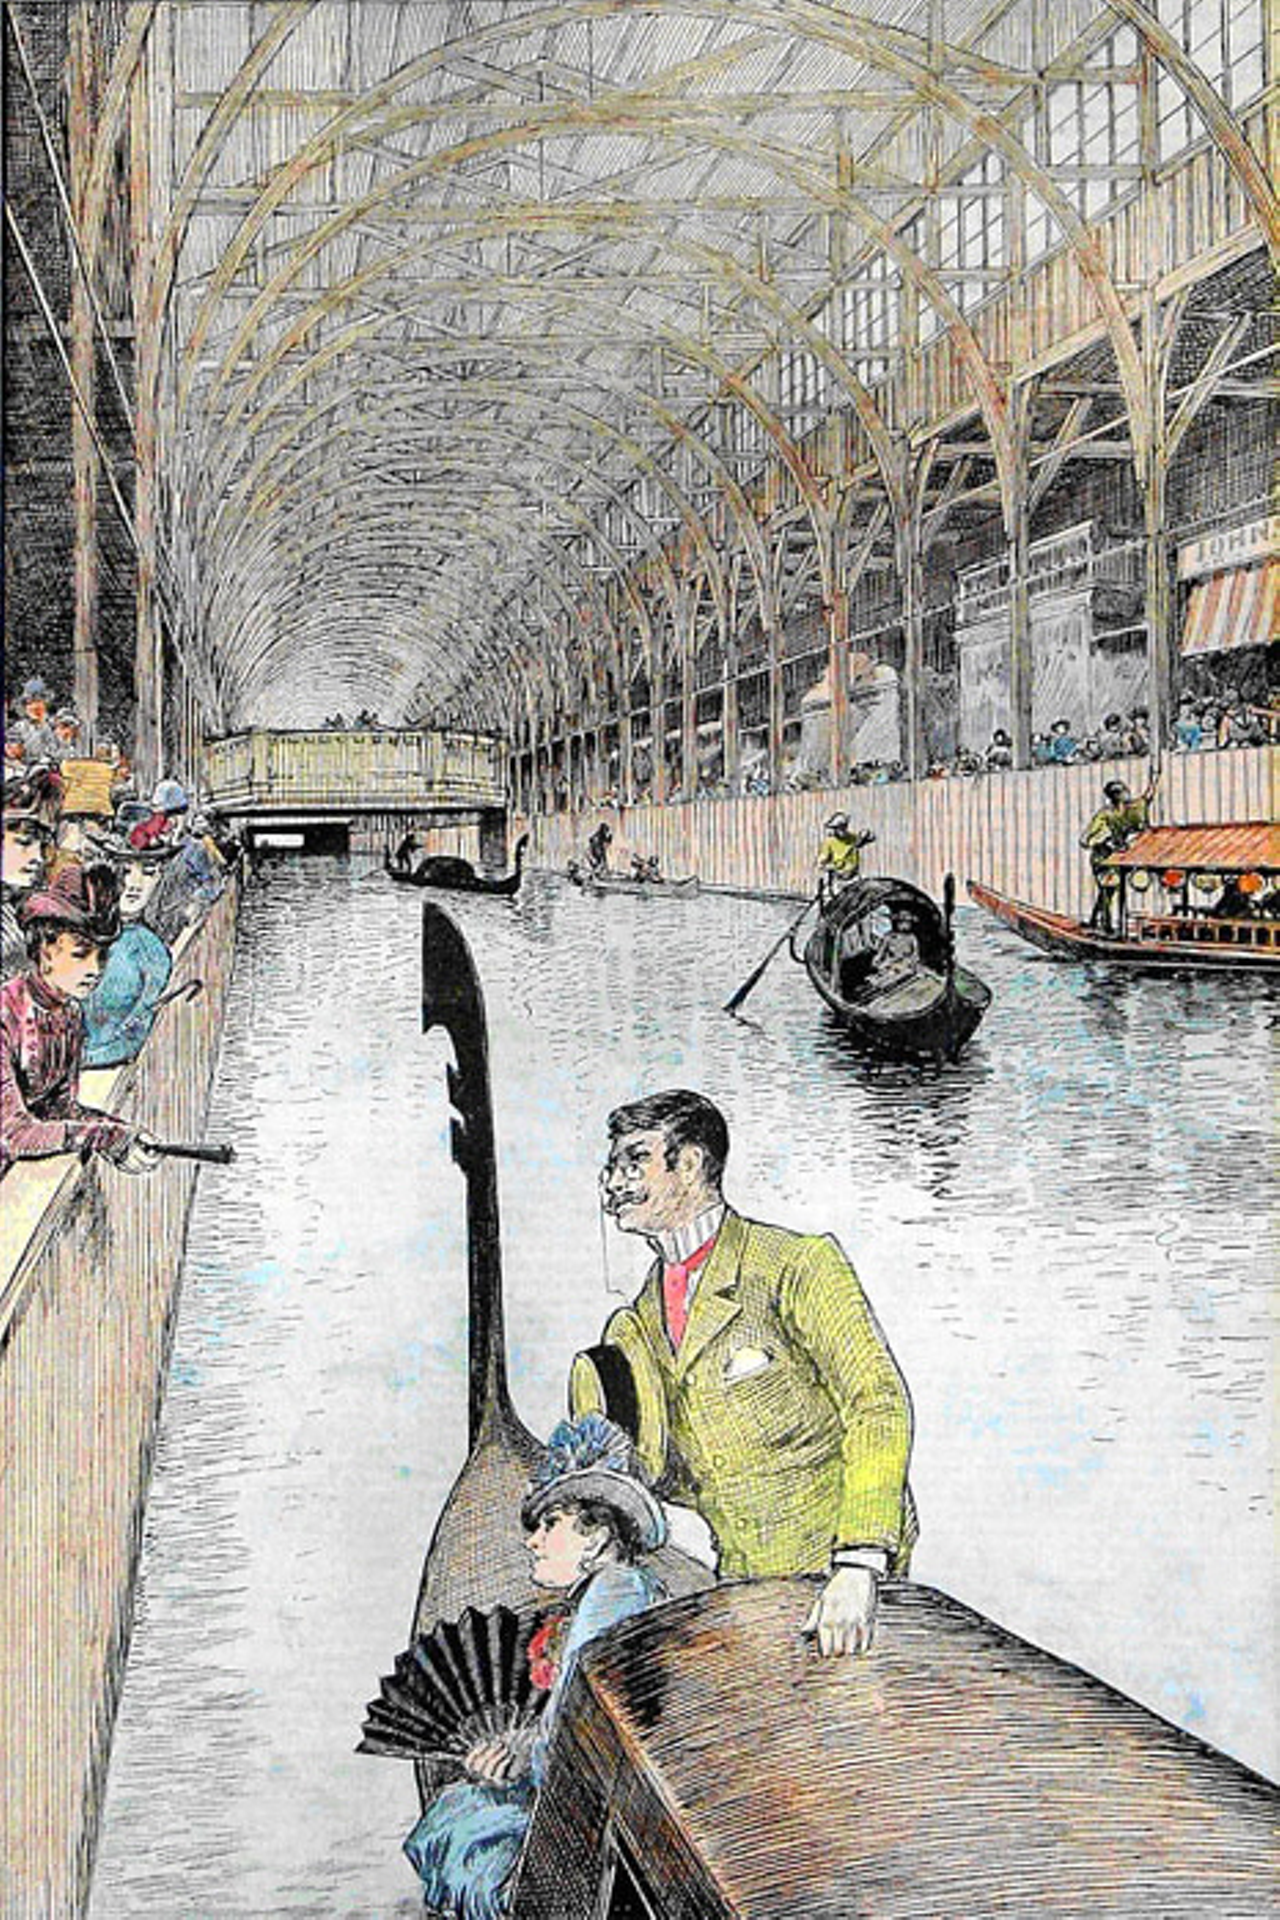 An illustration of gondolas in Machinery Hall. Daily performances were staged on ships on the covered waterway, as were canal races and gondola rides.